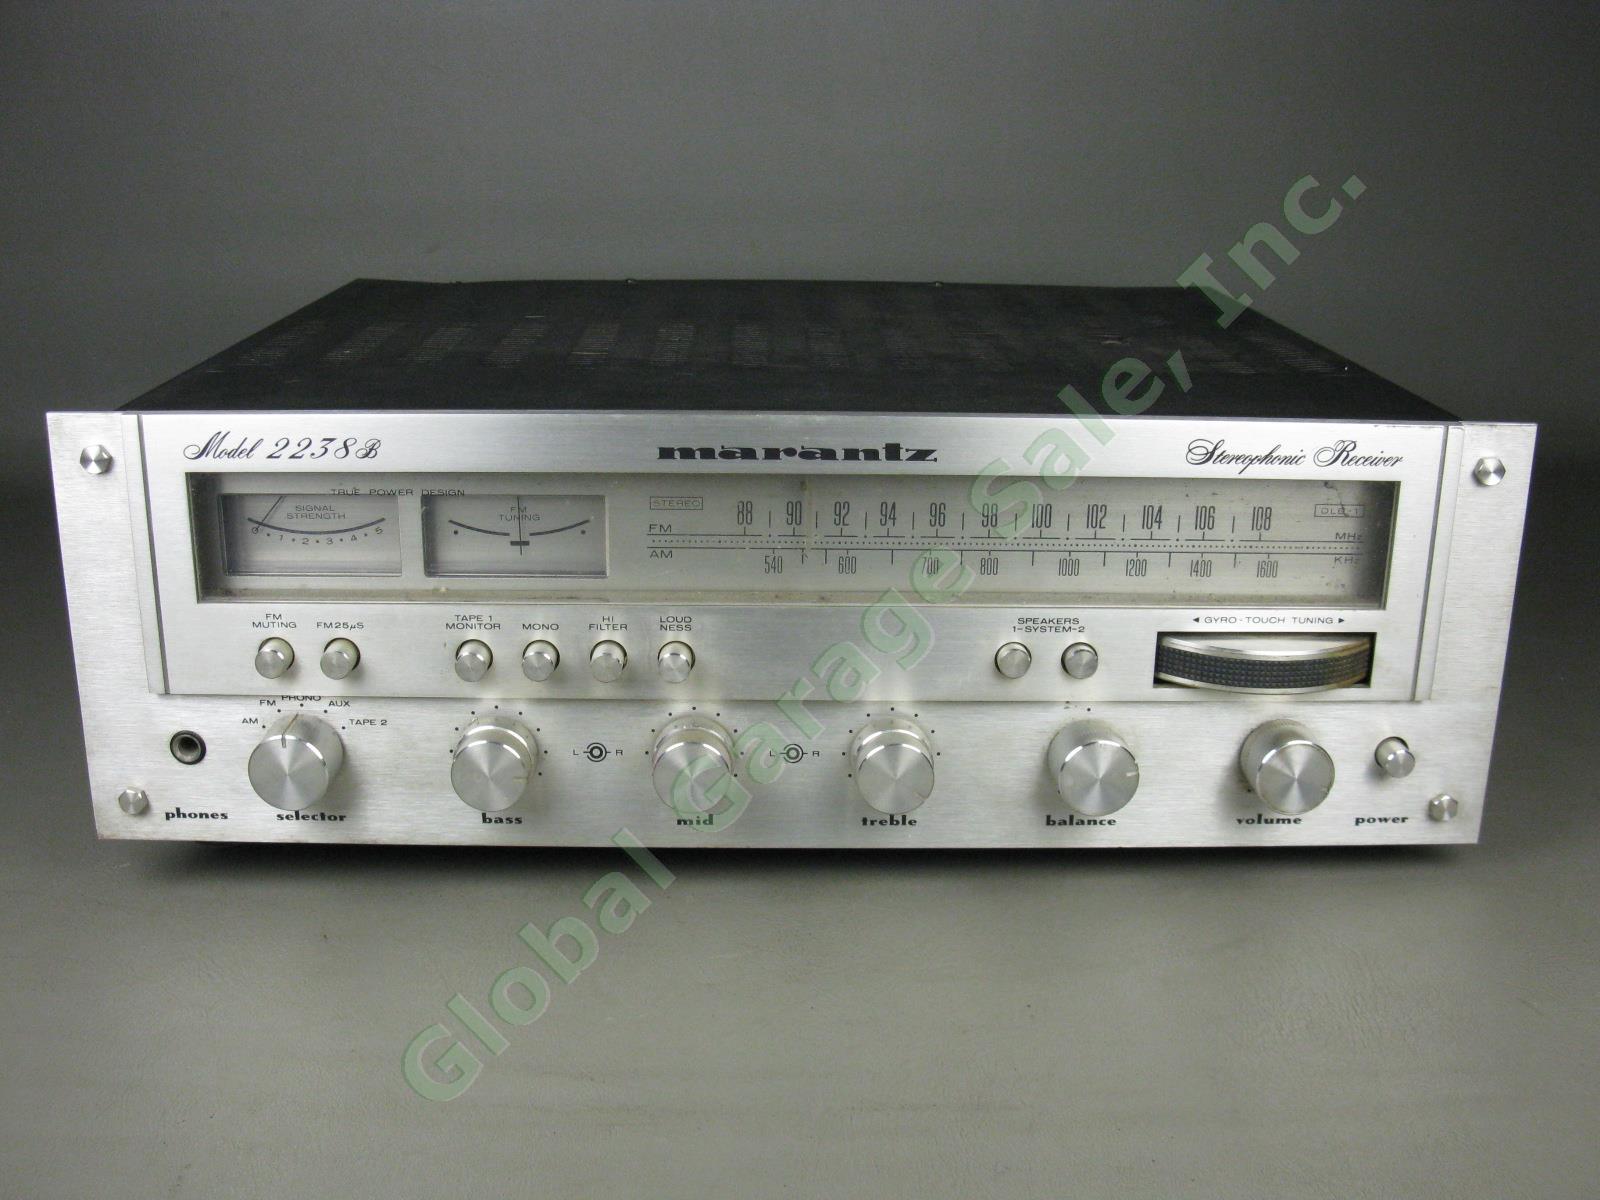 Vtg Marantz 2238B Stereophonic AM/FM Stereo Receiver Integrated Amplifier Preamp